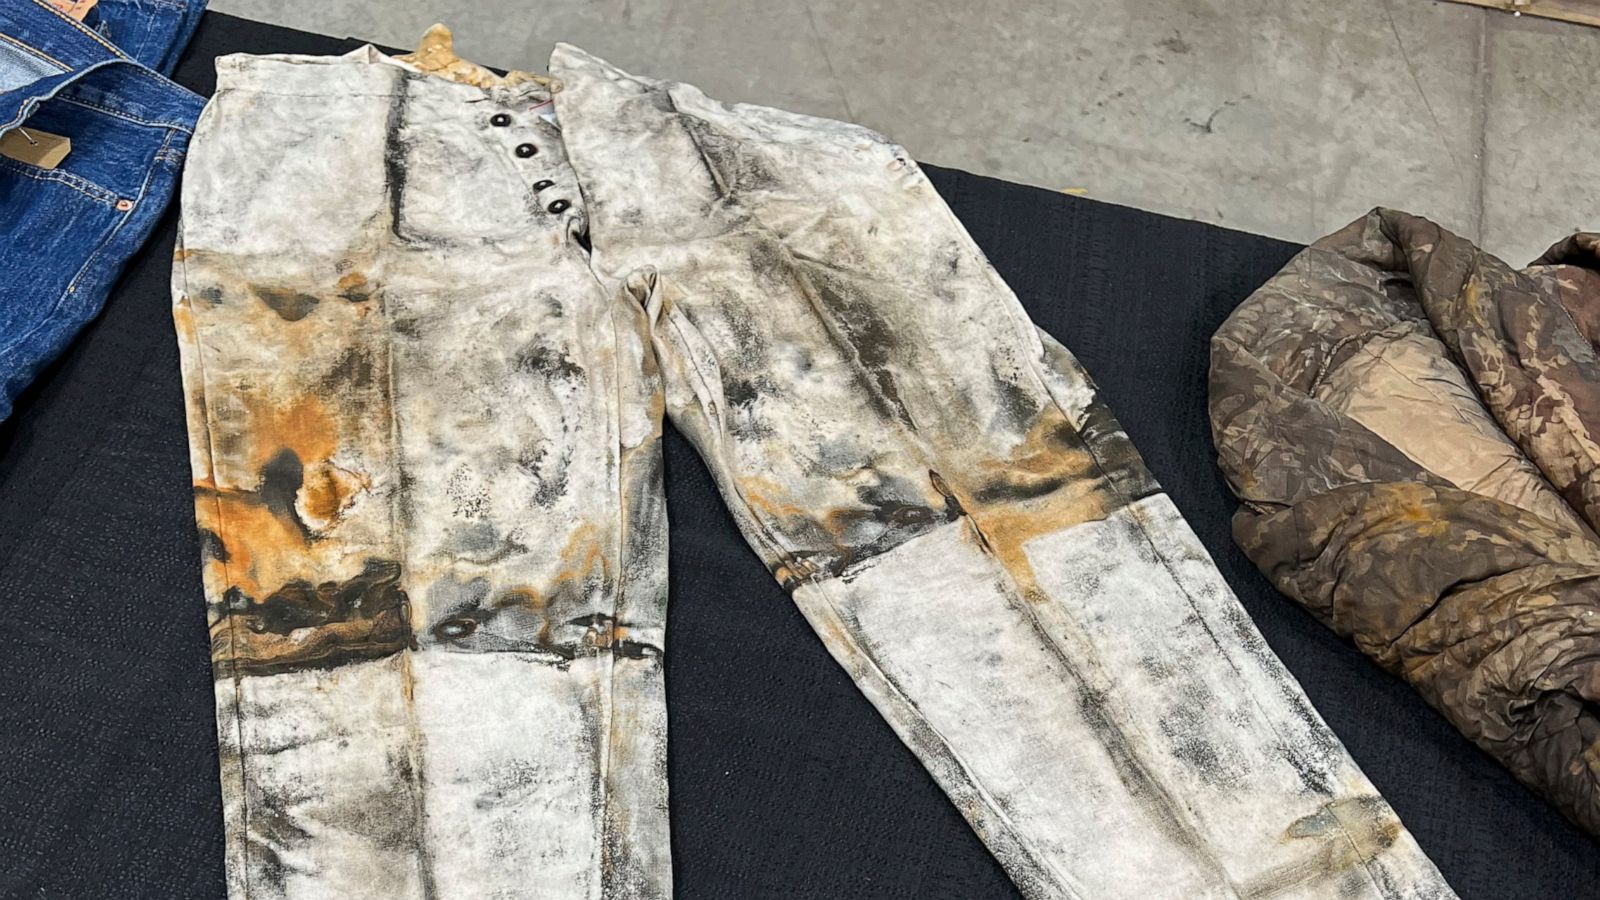 Pricey pants from 1857 go for $114k, raise Levi's questions - ABC News